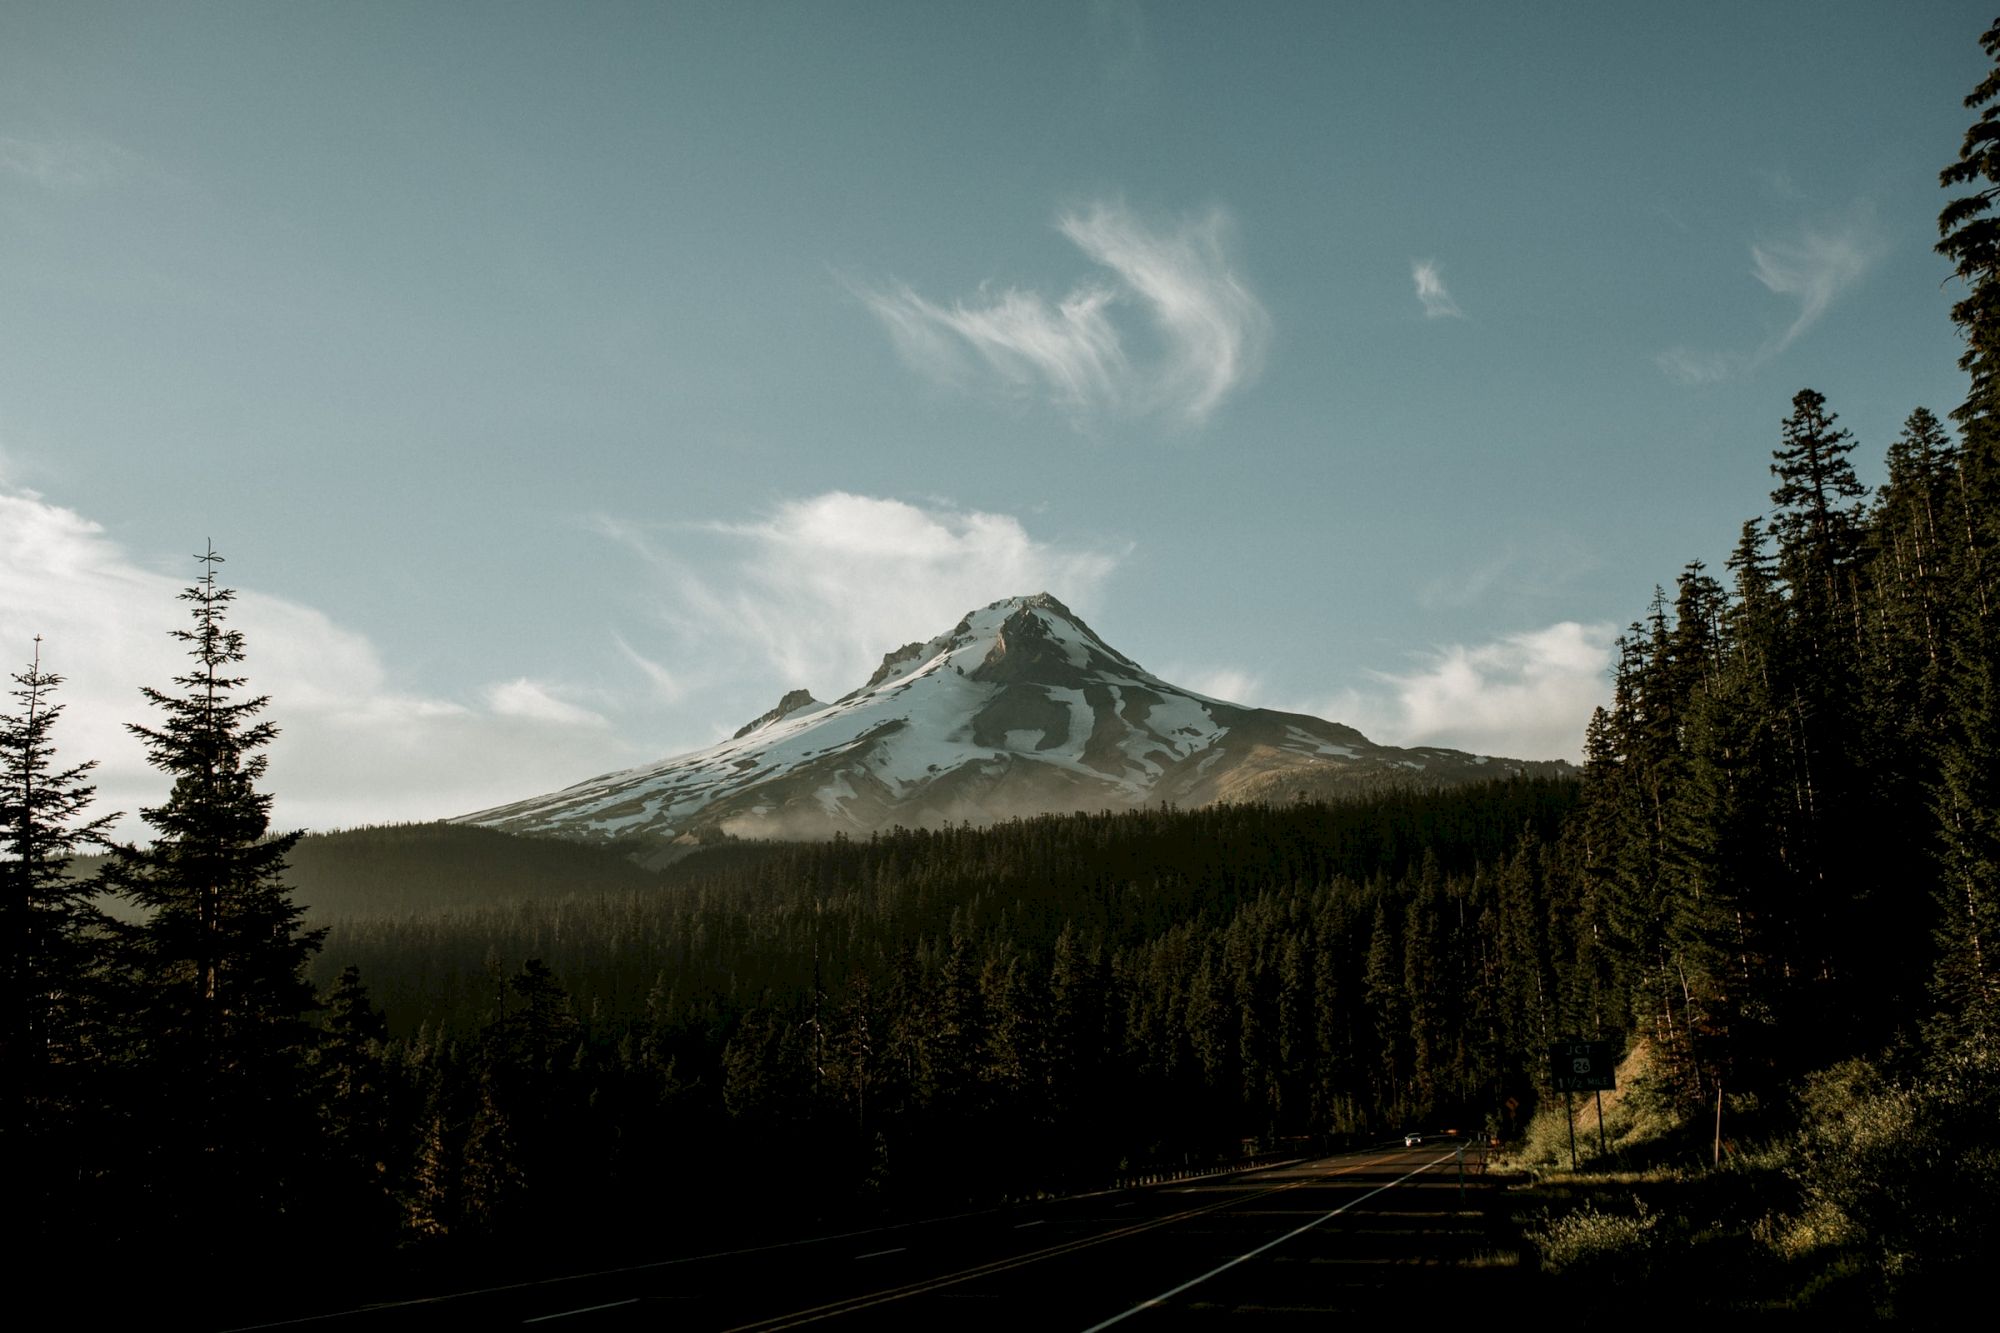 A snow-capped mountain stands tall under a clear sky with scattered clouds, surrounded by dense, evergreen forests and a road in the foreground.